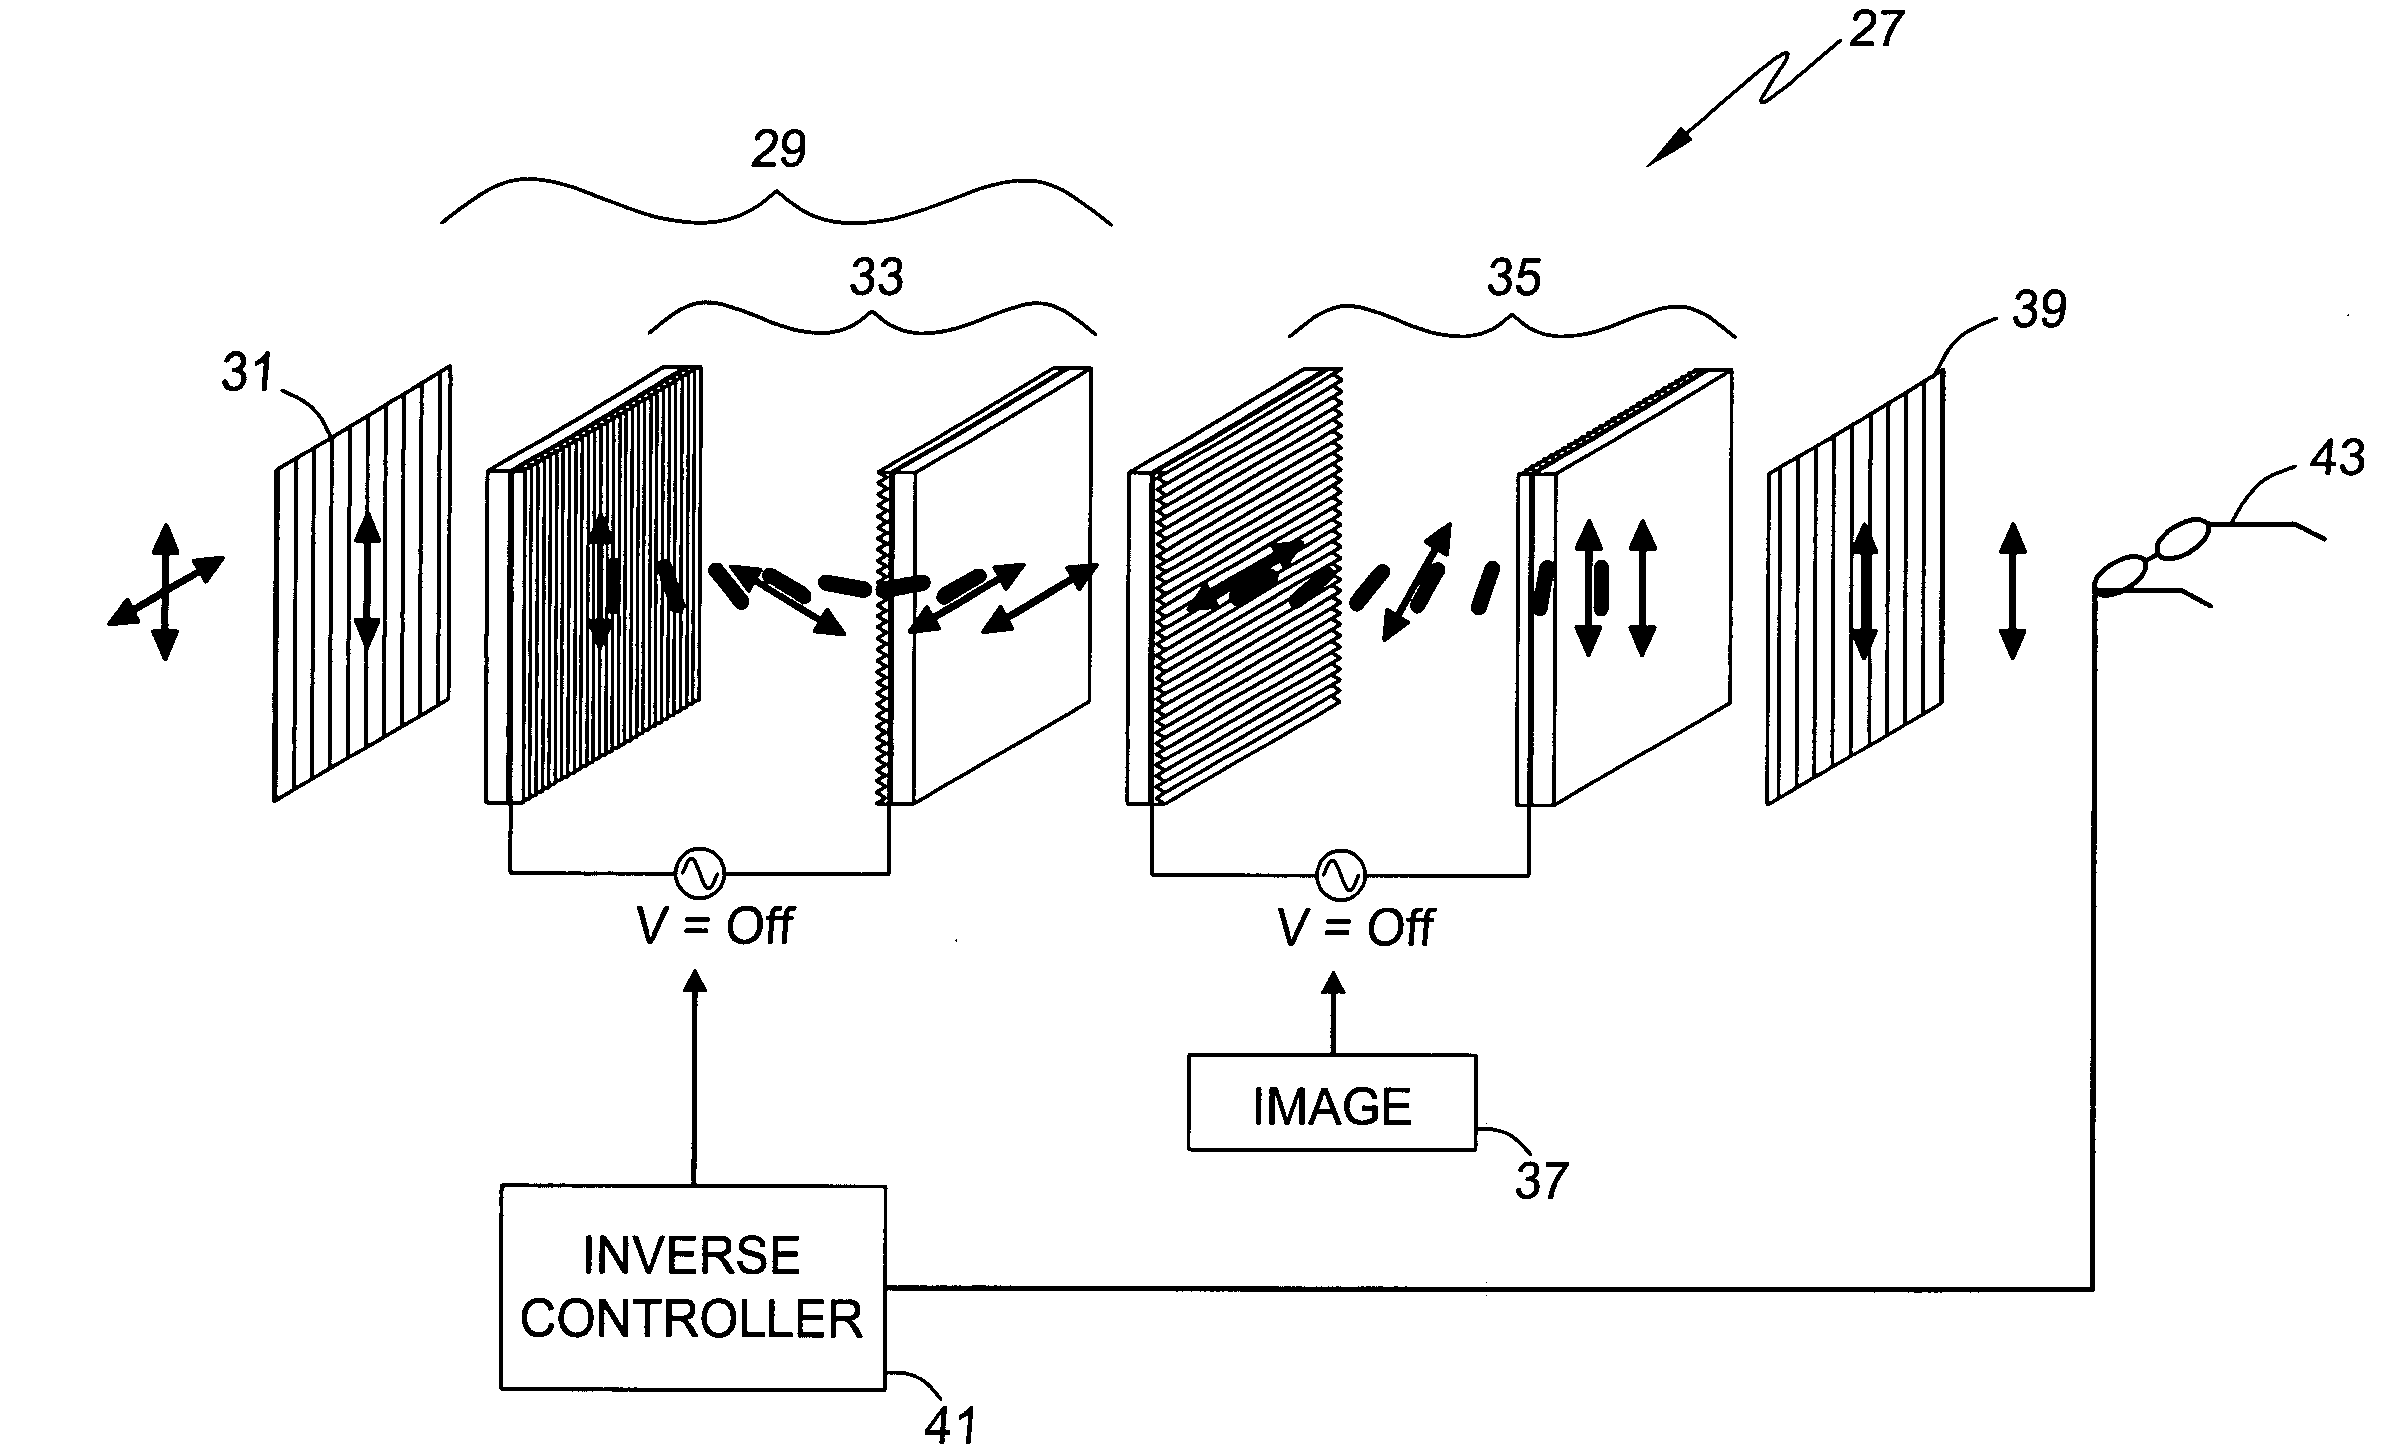 LCD-based confidential viewing apparatus utilizing auto-inversion masking